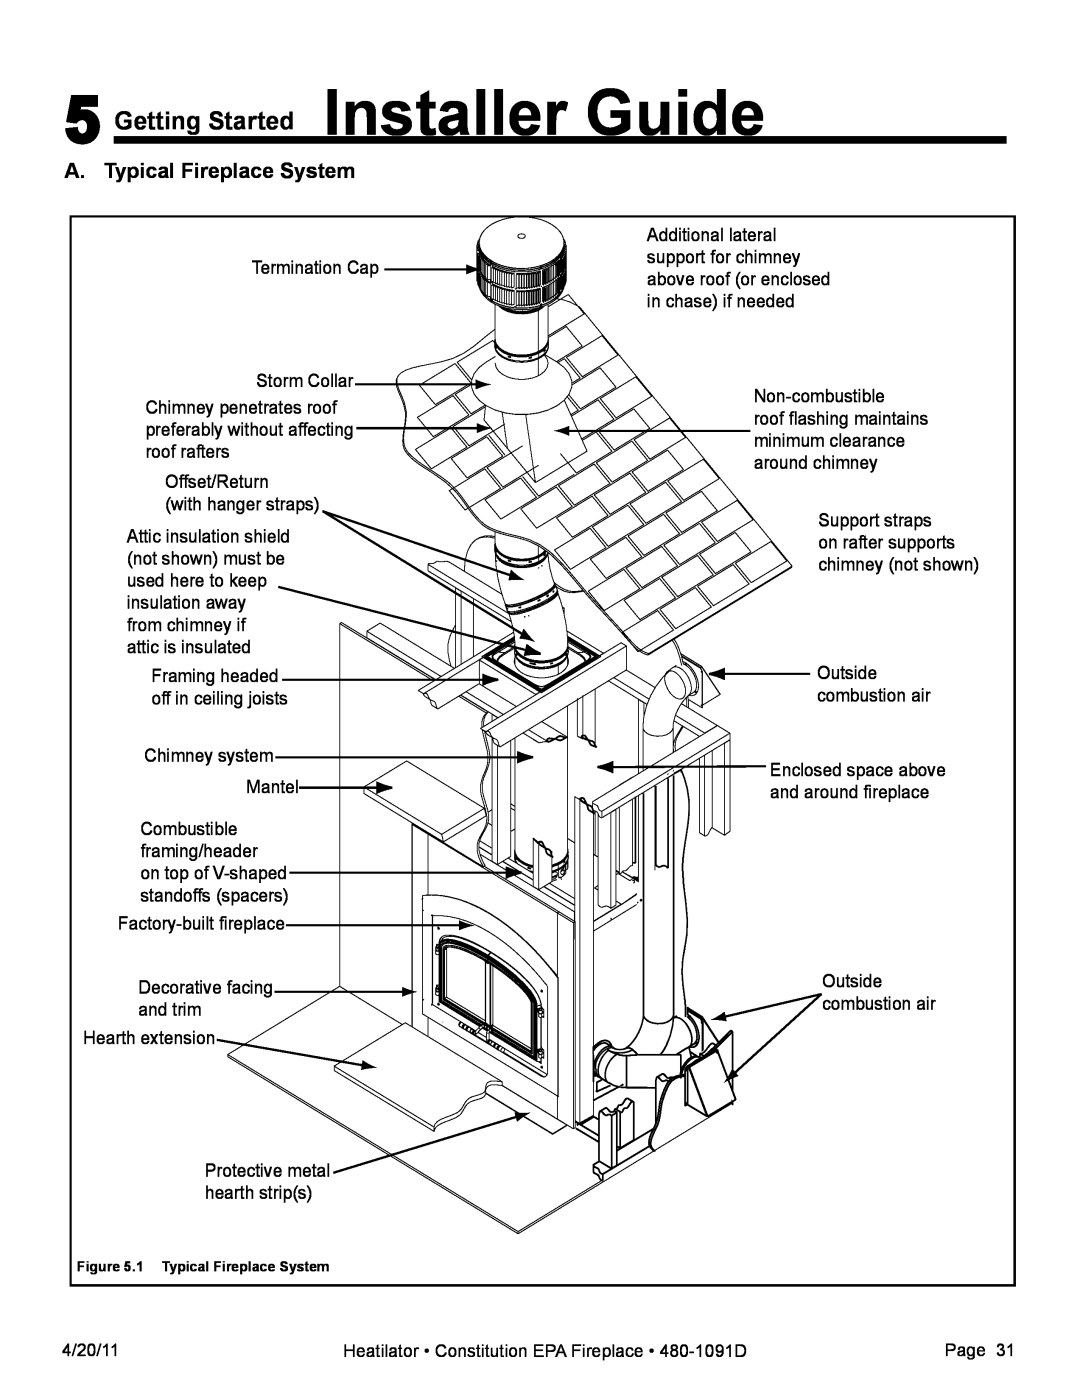 Heatiator C40 owner manual Getting Started Installer Guide, A. Typical Fireplace System 